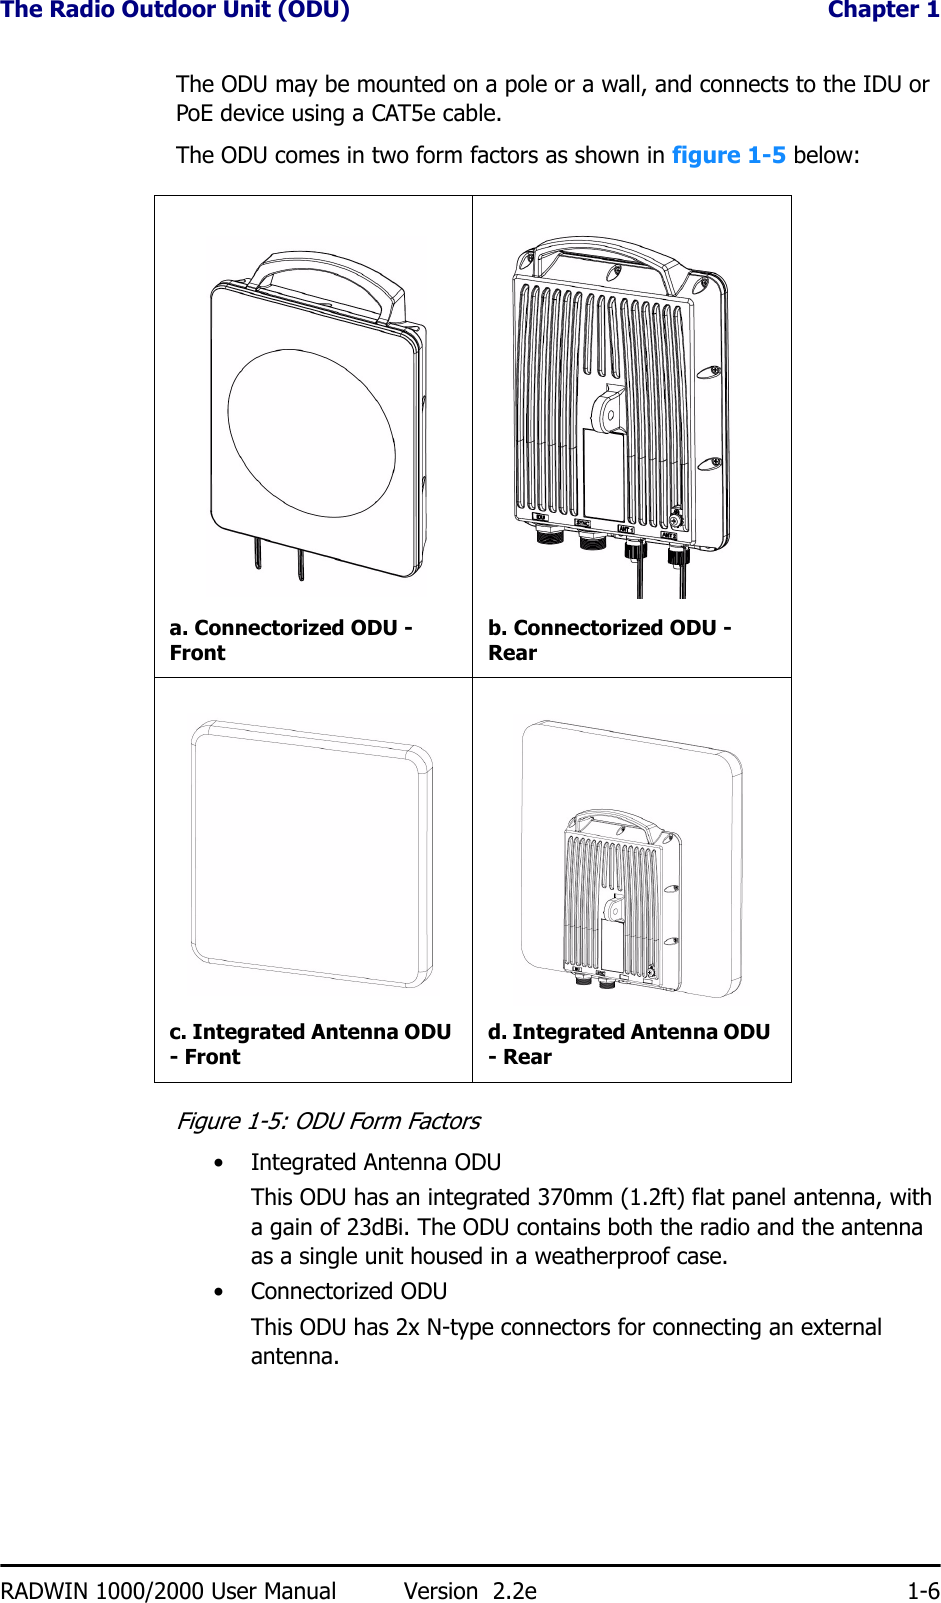 The Radio Outdoor Unit (ODU)  Chapter 1RADWIN 1000/2000 User Manual Version  2.2e 1-6The ODU may be mounted on a pole or a wall, and connects to the IDU or PoE device using a CAT5e cable.The ODU comes in two form factors as shown in figure 1-5 below:Figure 1-5: ODU Form Factors• Integrated Antenna ODUThis ODU has an integrated 370mm (1.2ft) flat panel antenna, with a gain of 23dBi. The ODU contains both the radio and the antenna as a single unit housed in a weatherproof case.•Connectorized ODUThis ODU has 2x N-type connectors for connecting an external antenna.a. Connectorized ODU - Frontb. Connectorized ODU - Rearc. Integrated Antenna ODU - Frontd. Integrated Antenna ODU - Rear